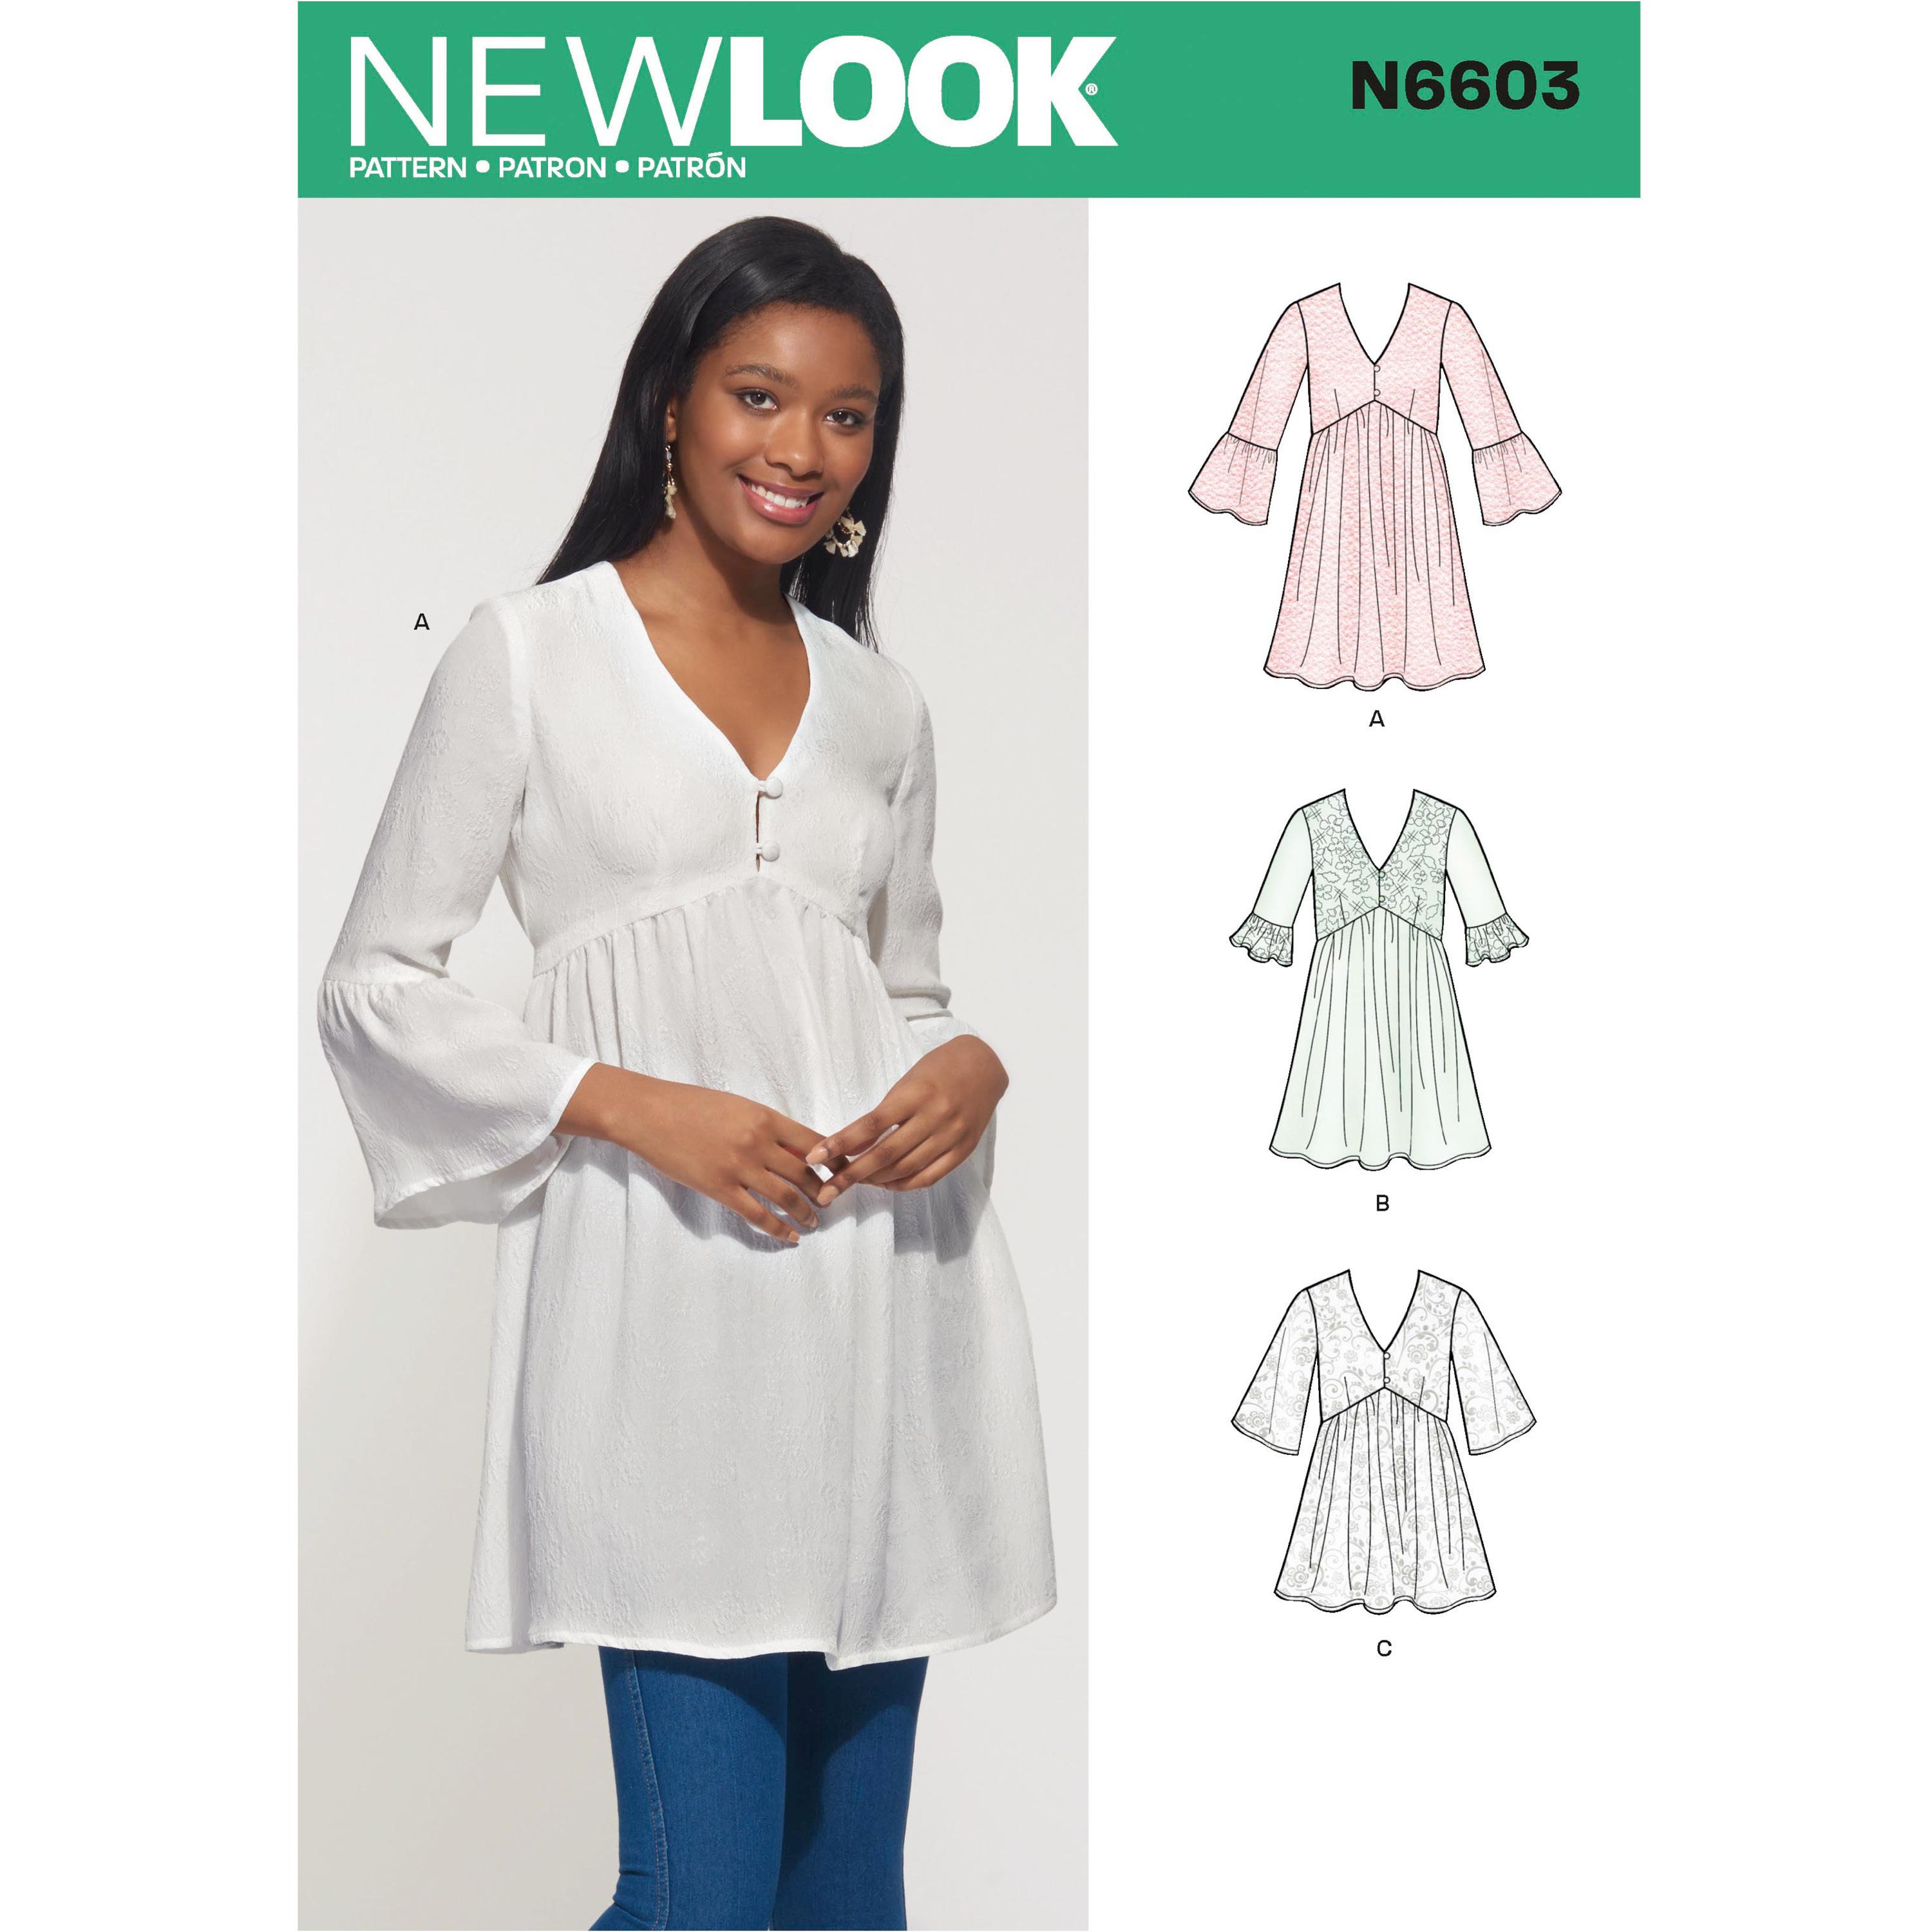 NewLook Sewing Pattern N6603 Misses' Mini Dress, Tunic and Top